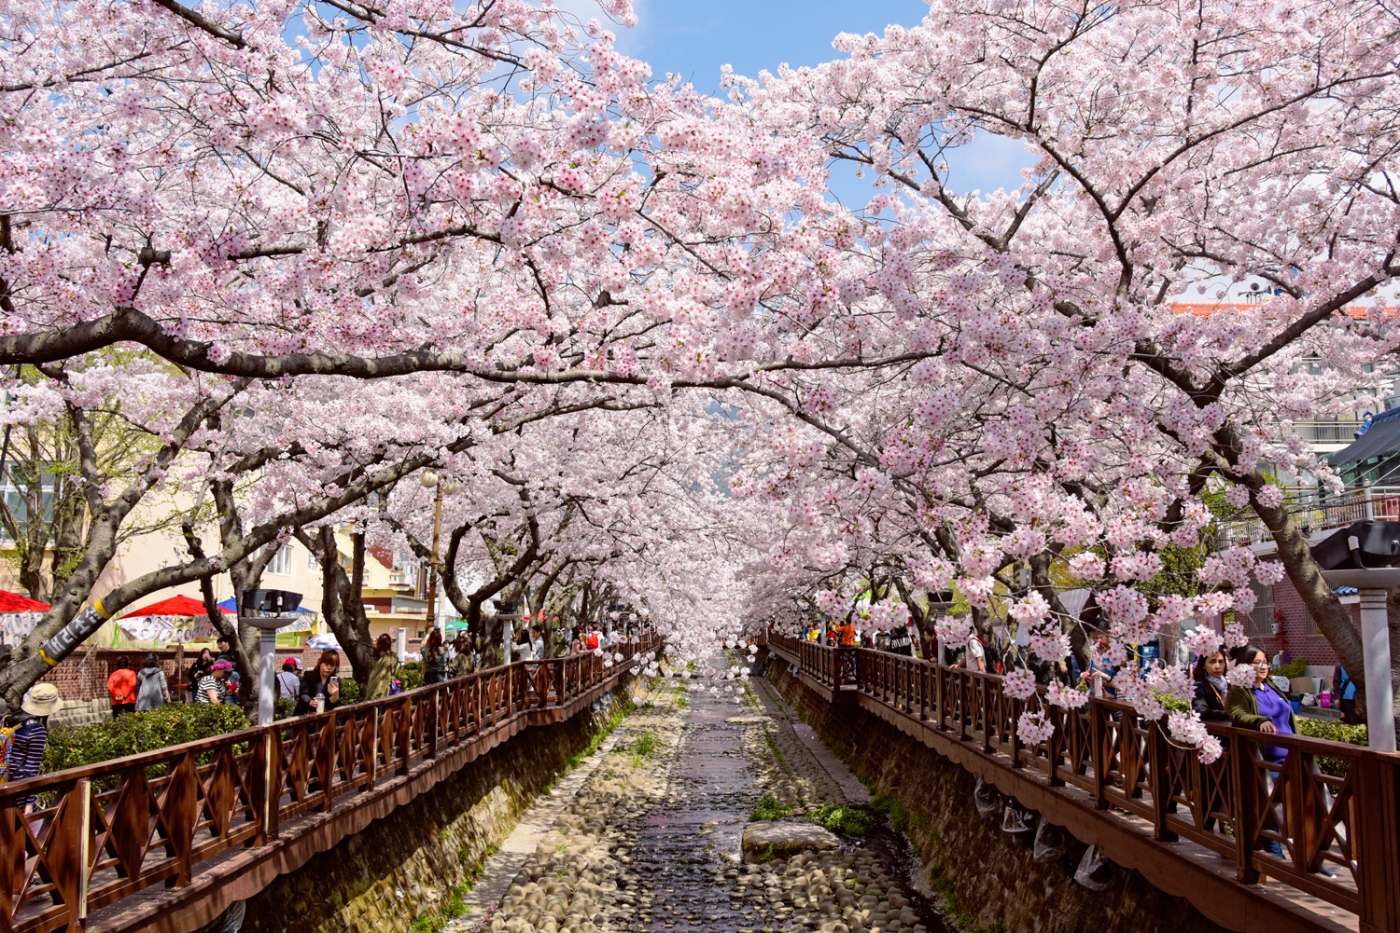 Jinhae Cherry Blossom Festival, the most significant Sakura celebrations, attracting millions annually © Klook